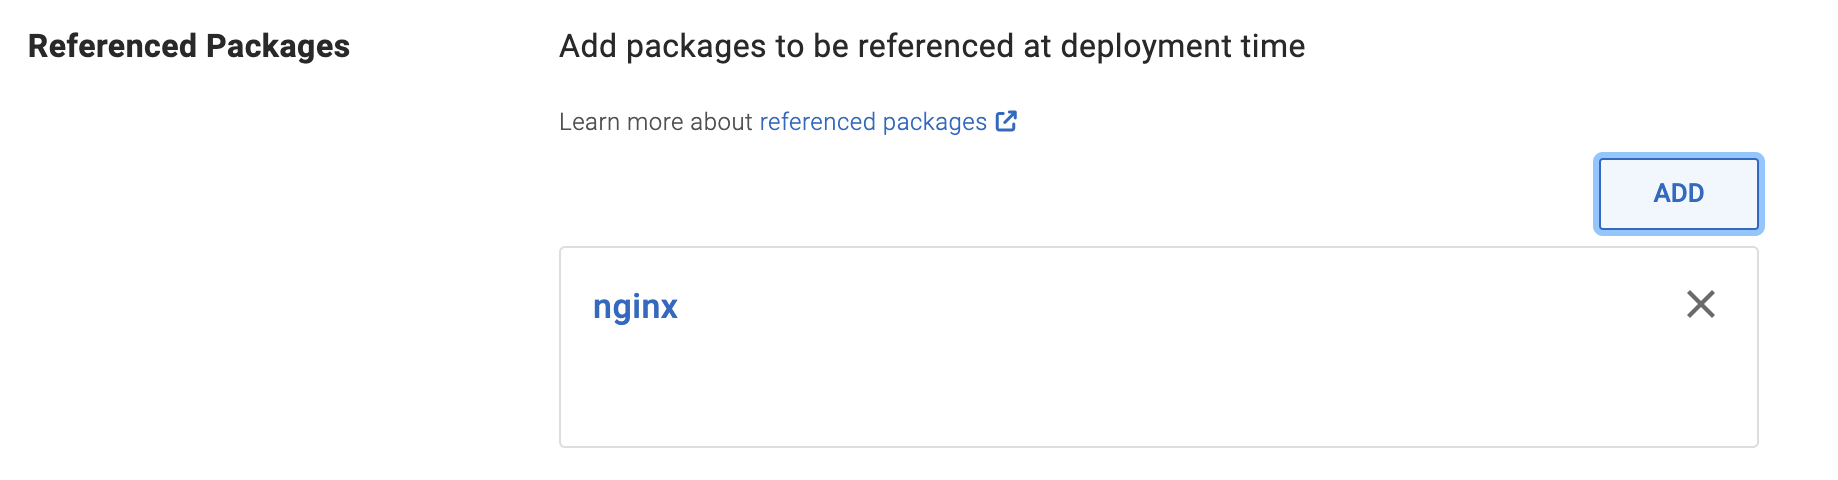 Add package references